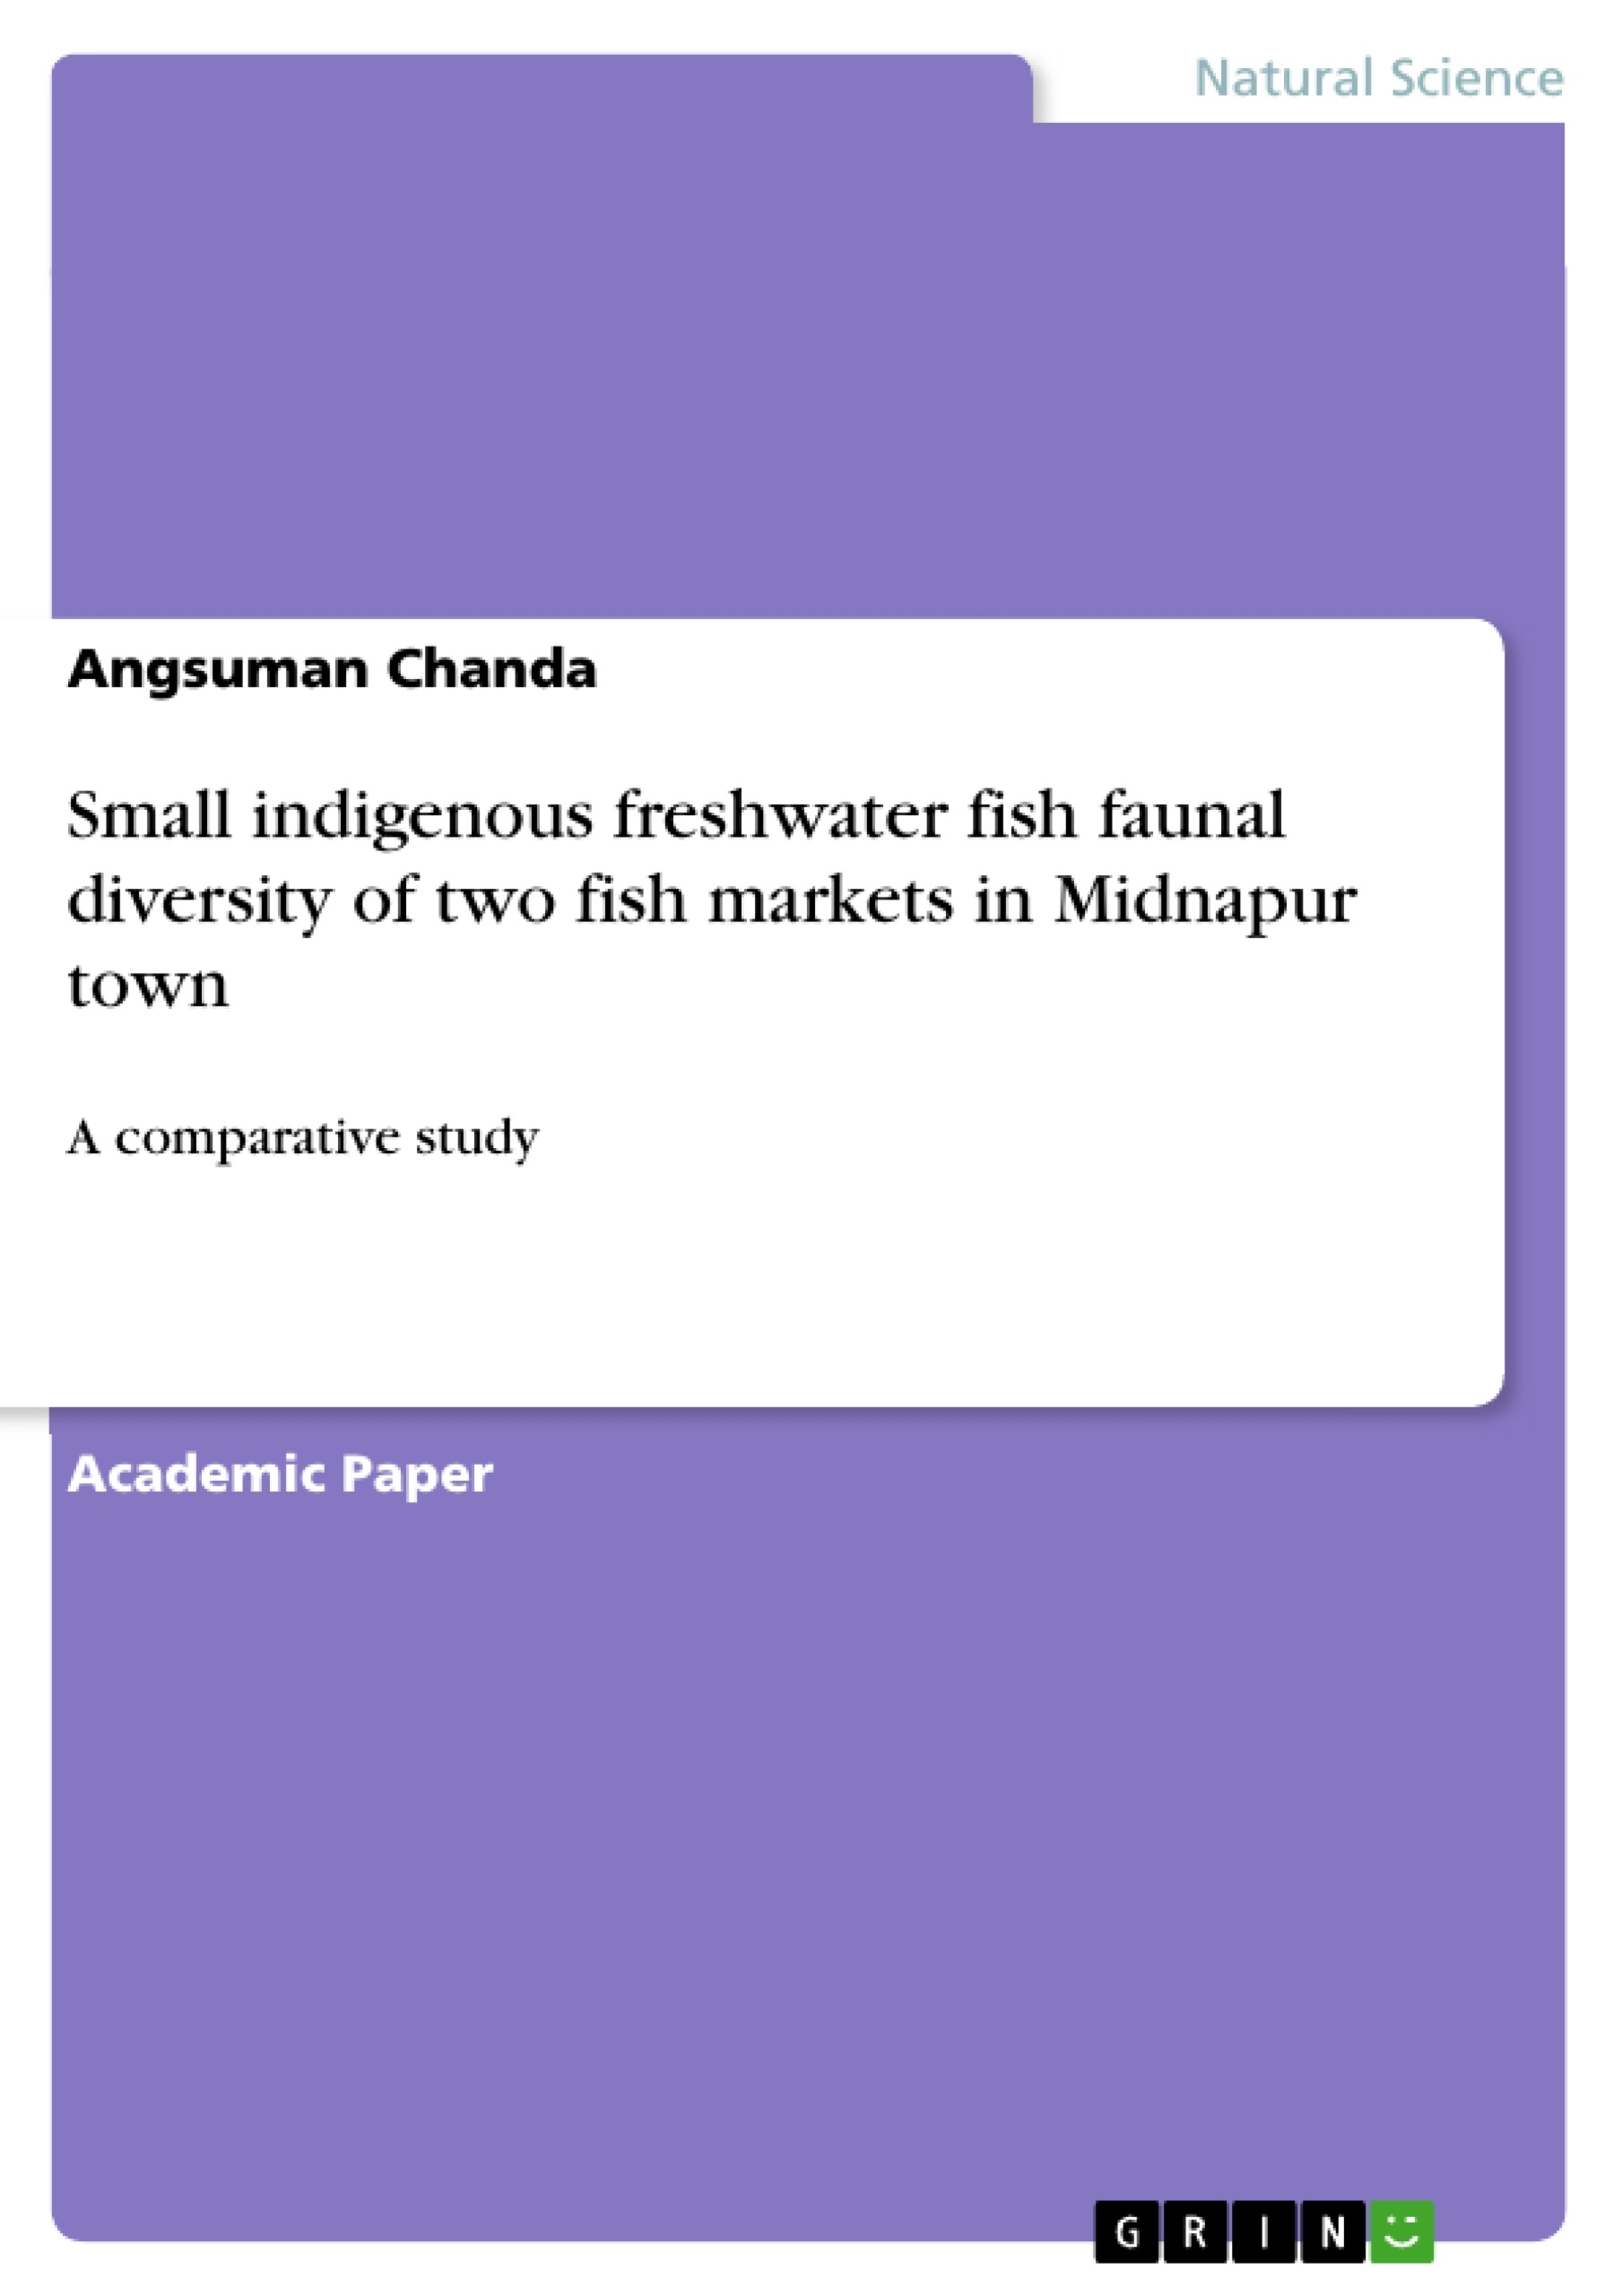 Title: Small indigenous freshwater fish faunal diversity of two fish markets in Midnapur town